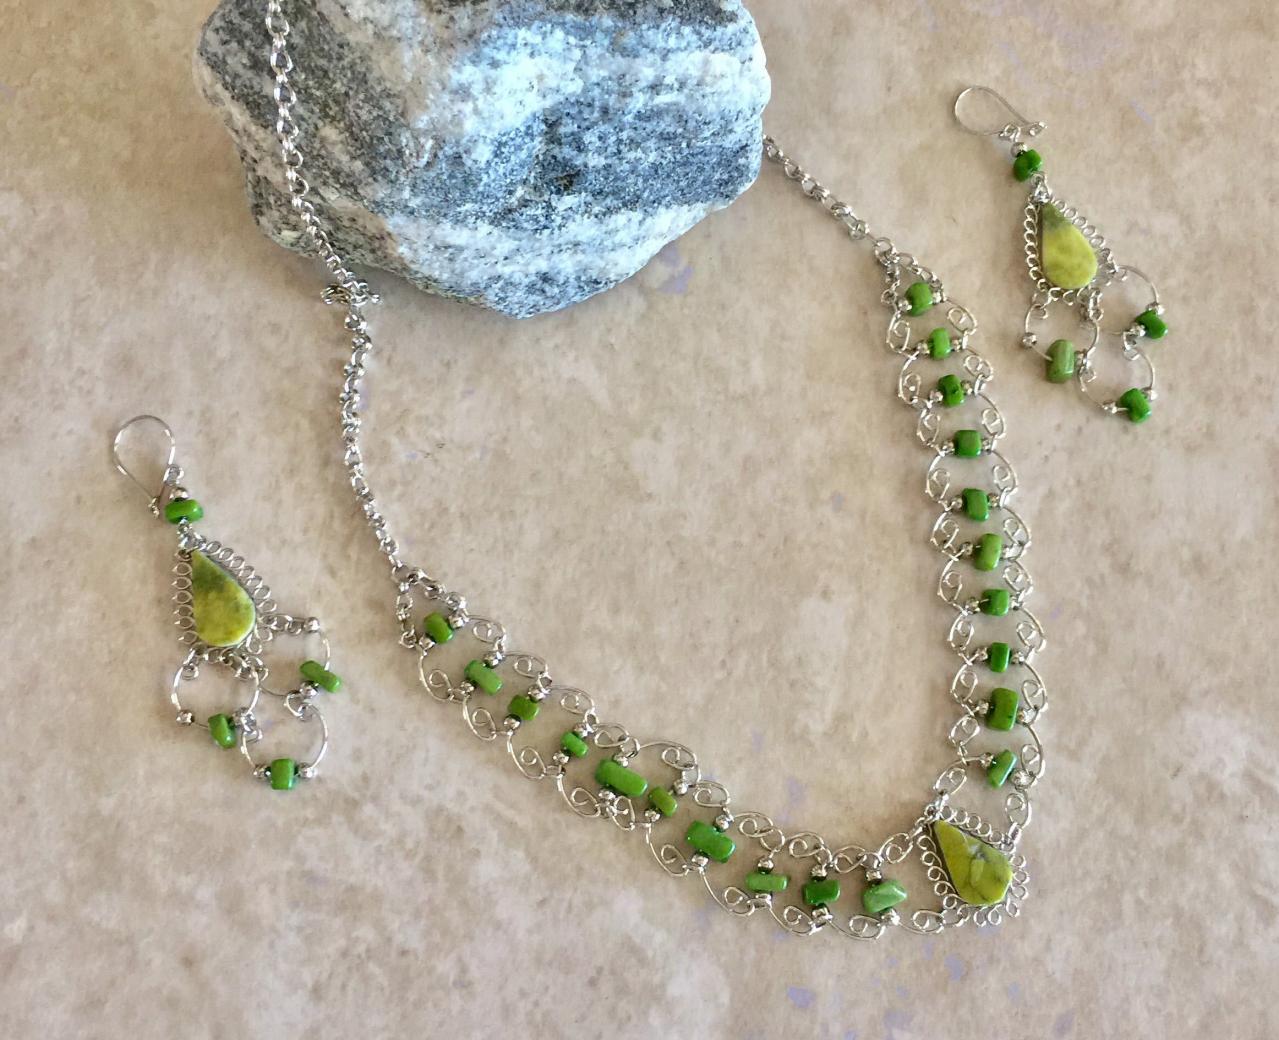 Teardrop Necklace And Earrings, Light Green Serpentine Necklace, Chocker Neck, Green Nuggets Necklace, Alpaca Silver Necklace, Handmade Neck